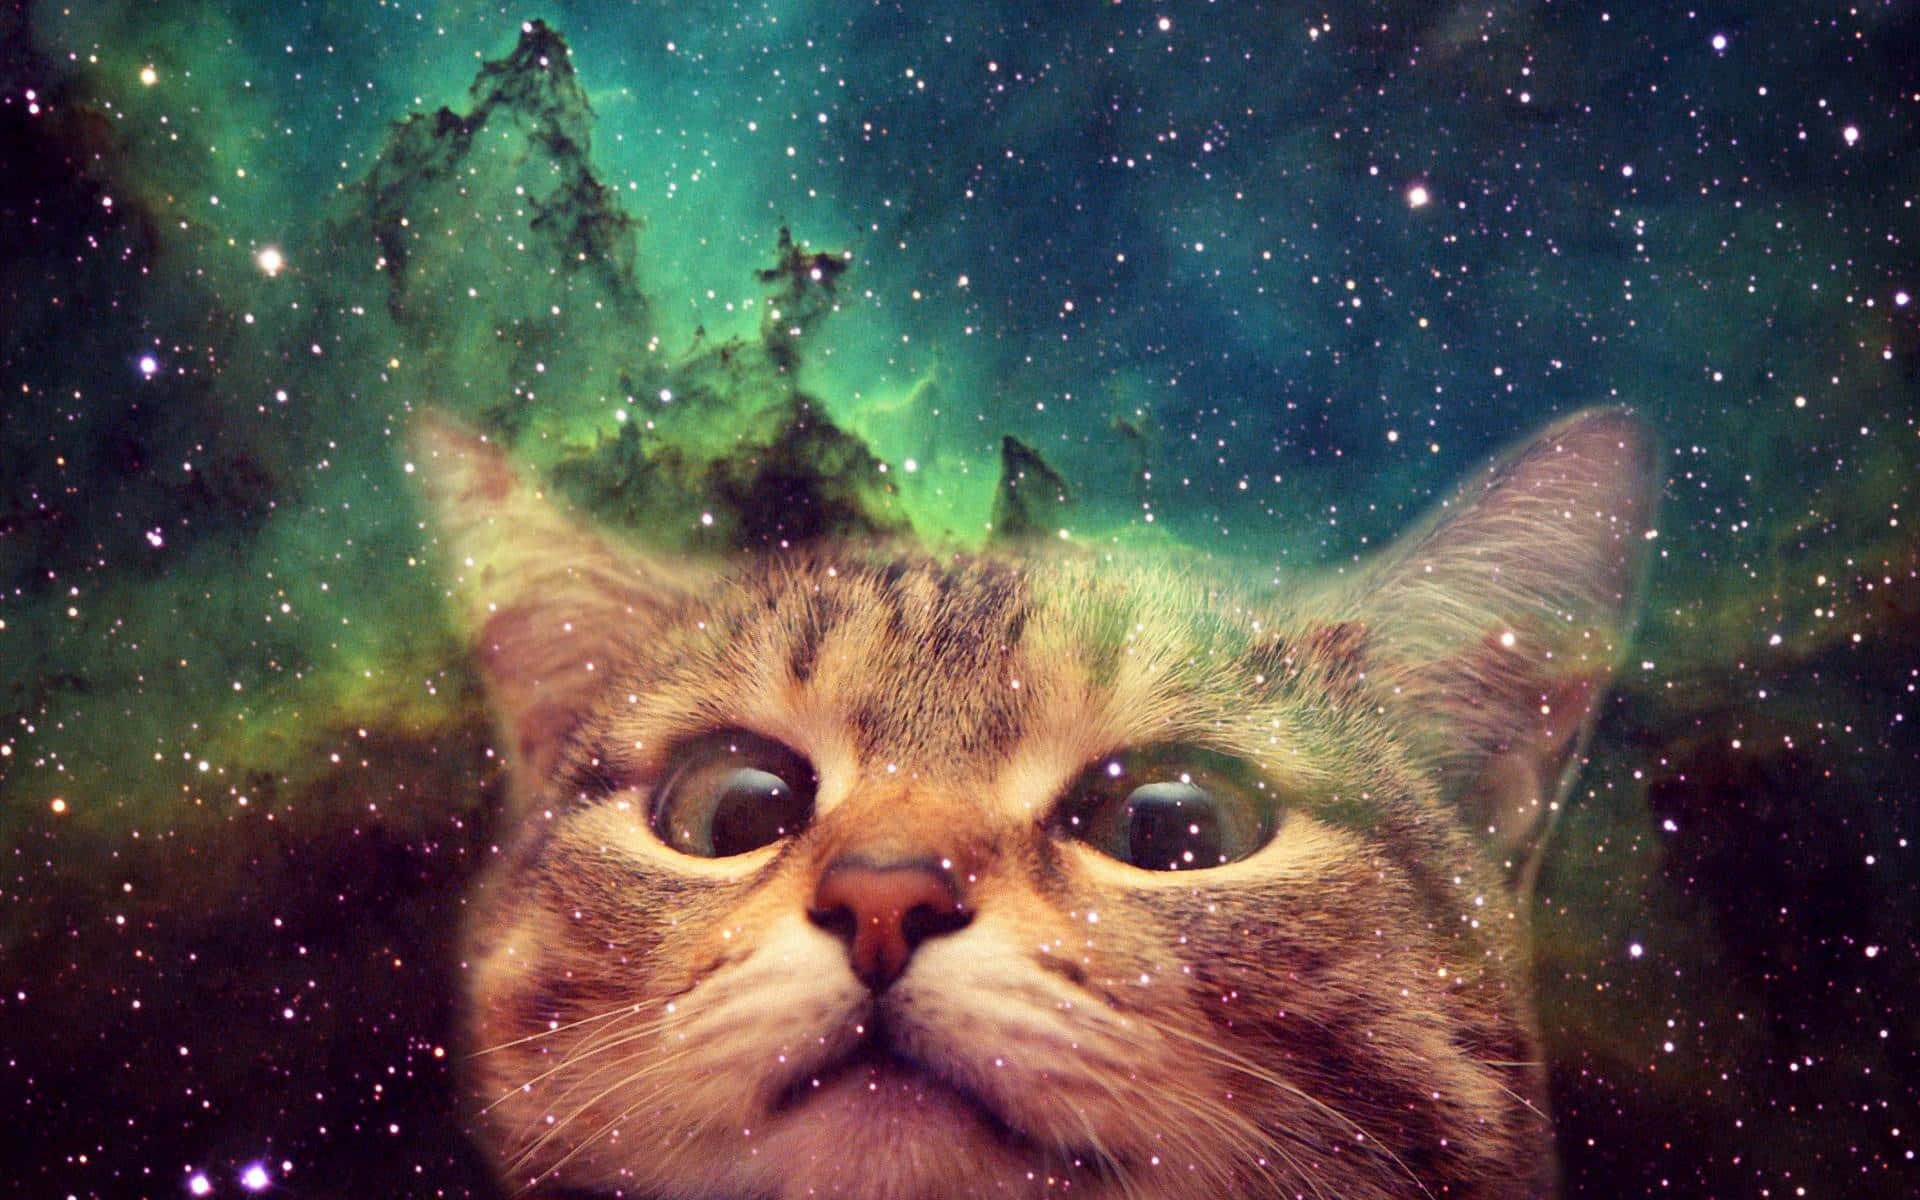 "Cats in Outer Space" Wallpaper